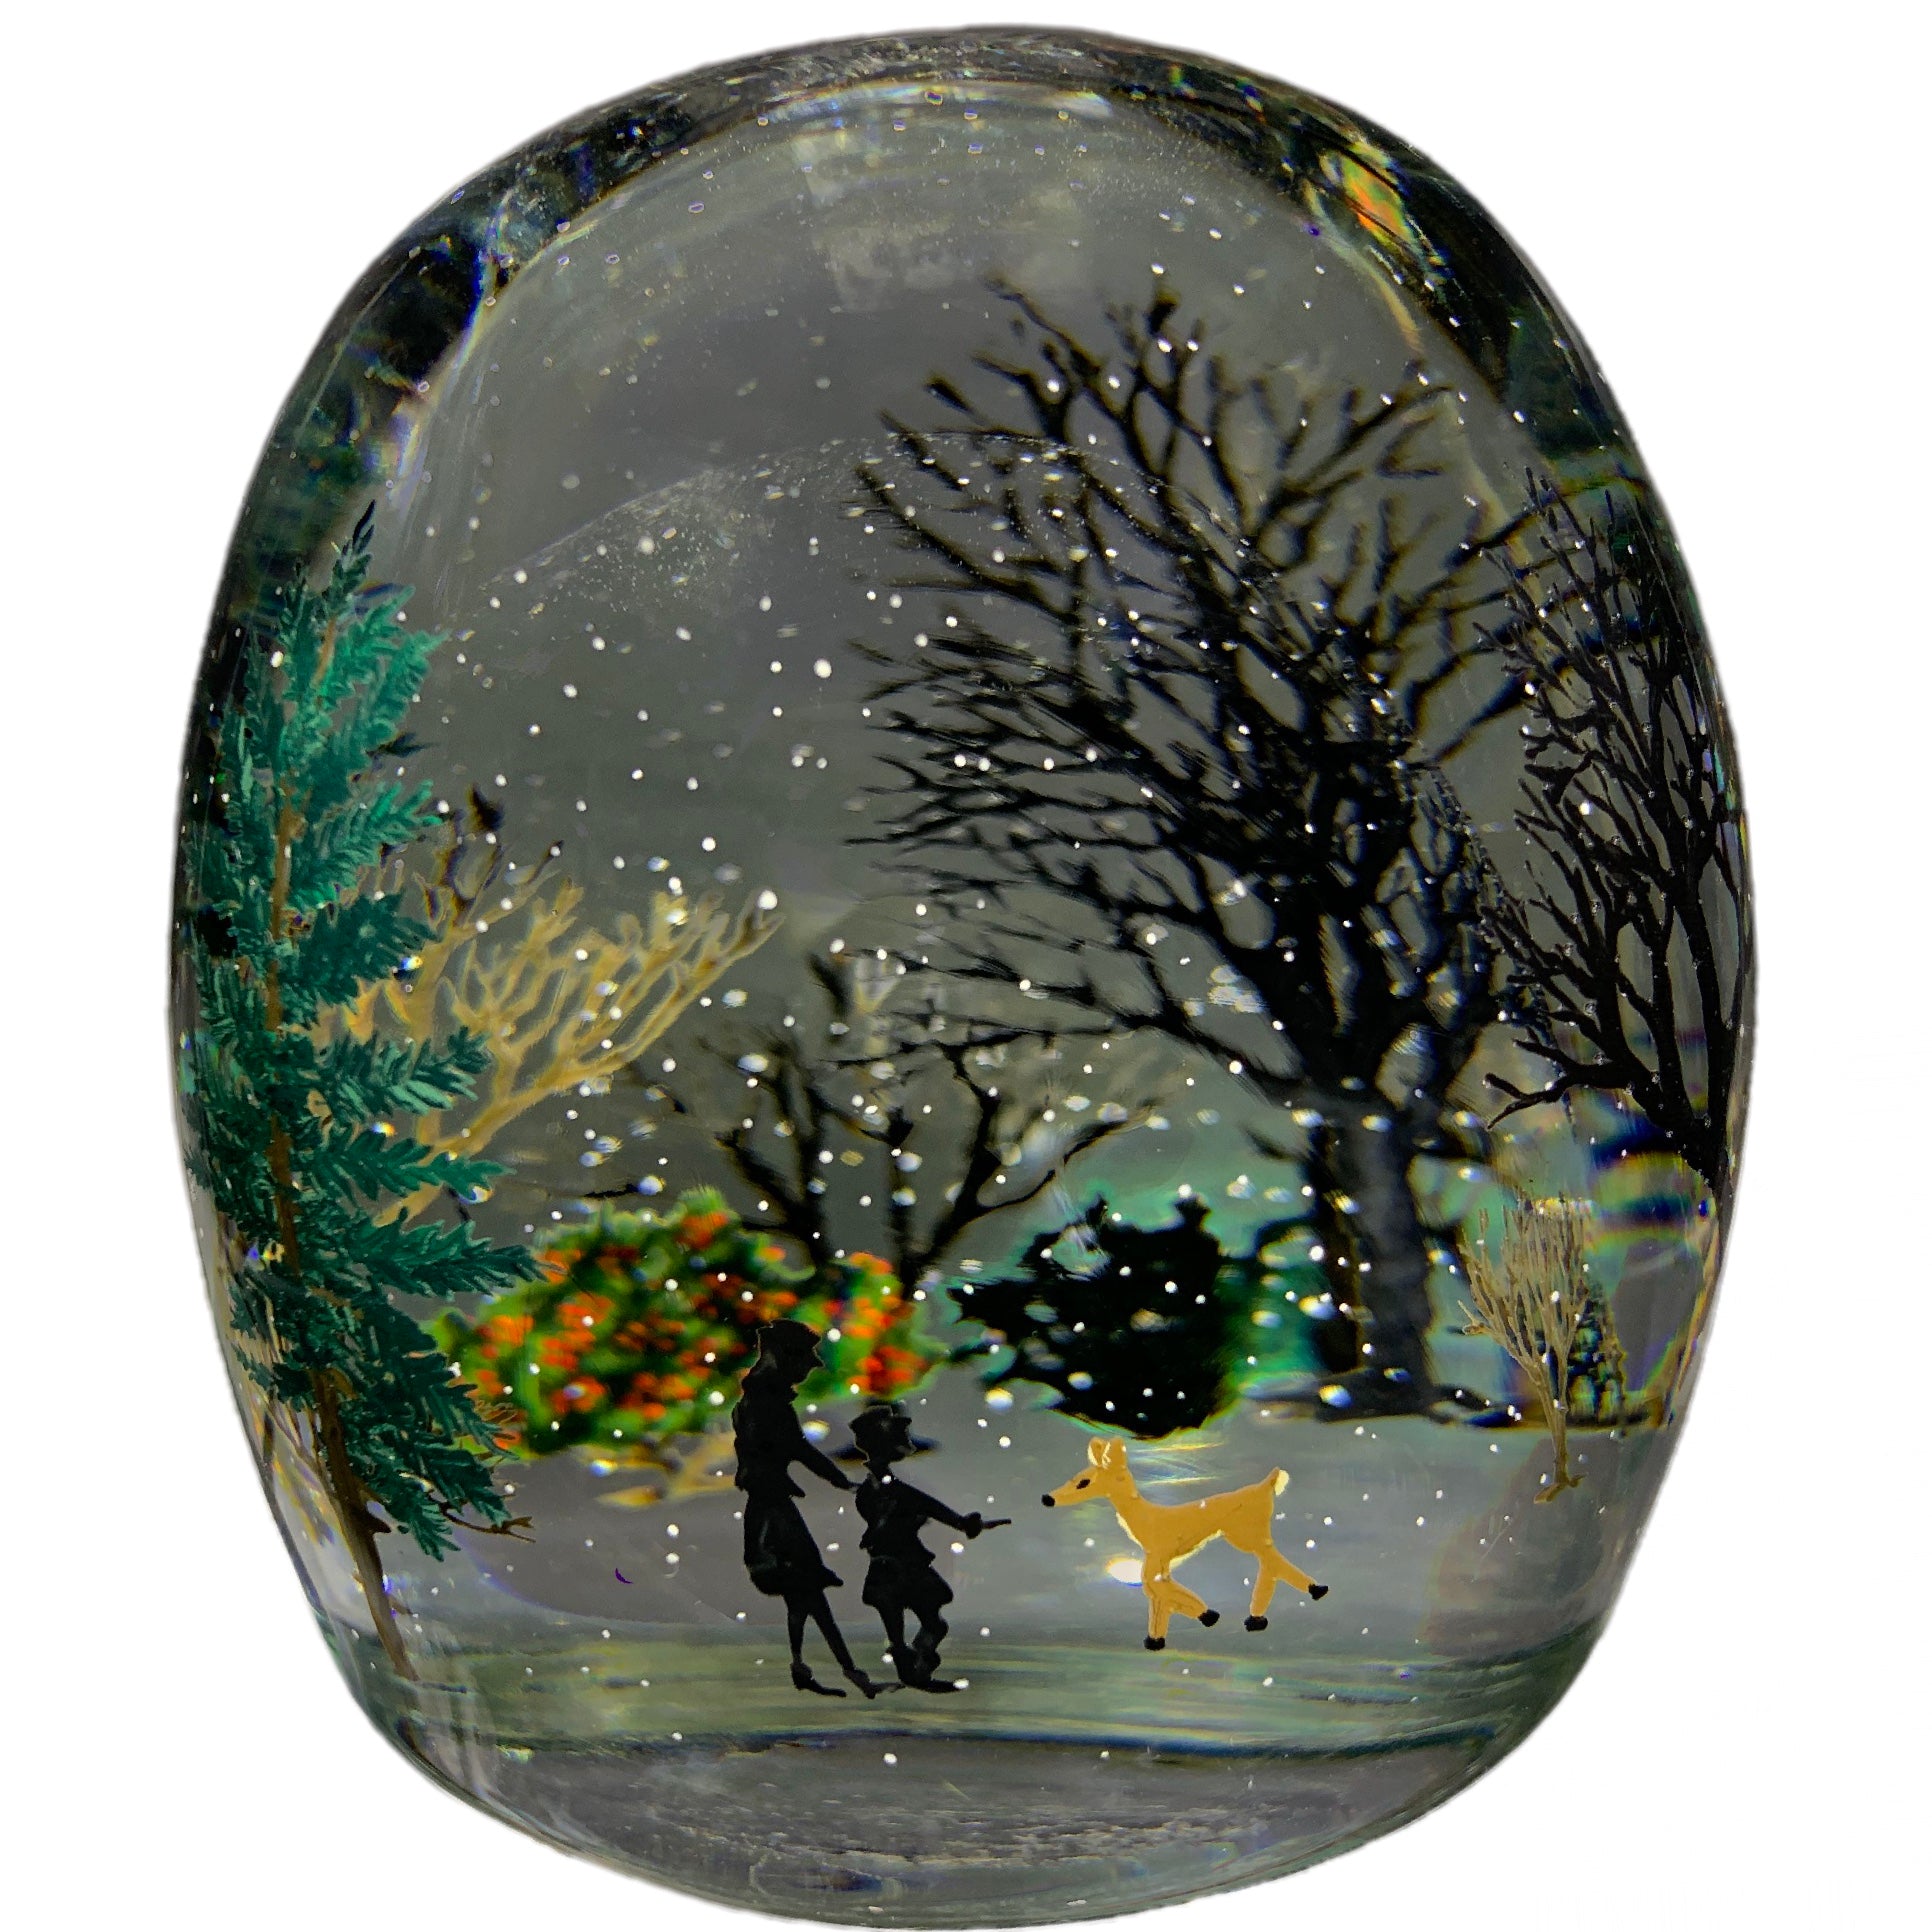 Alison Ruzsa 2019 Encapsulated Hand Painted Enamels Feeding the Deer in Falling Snow